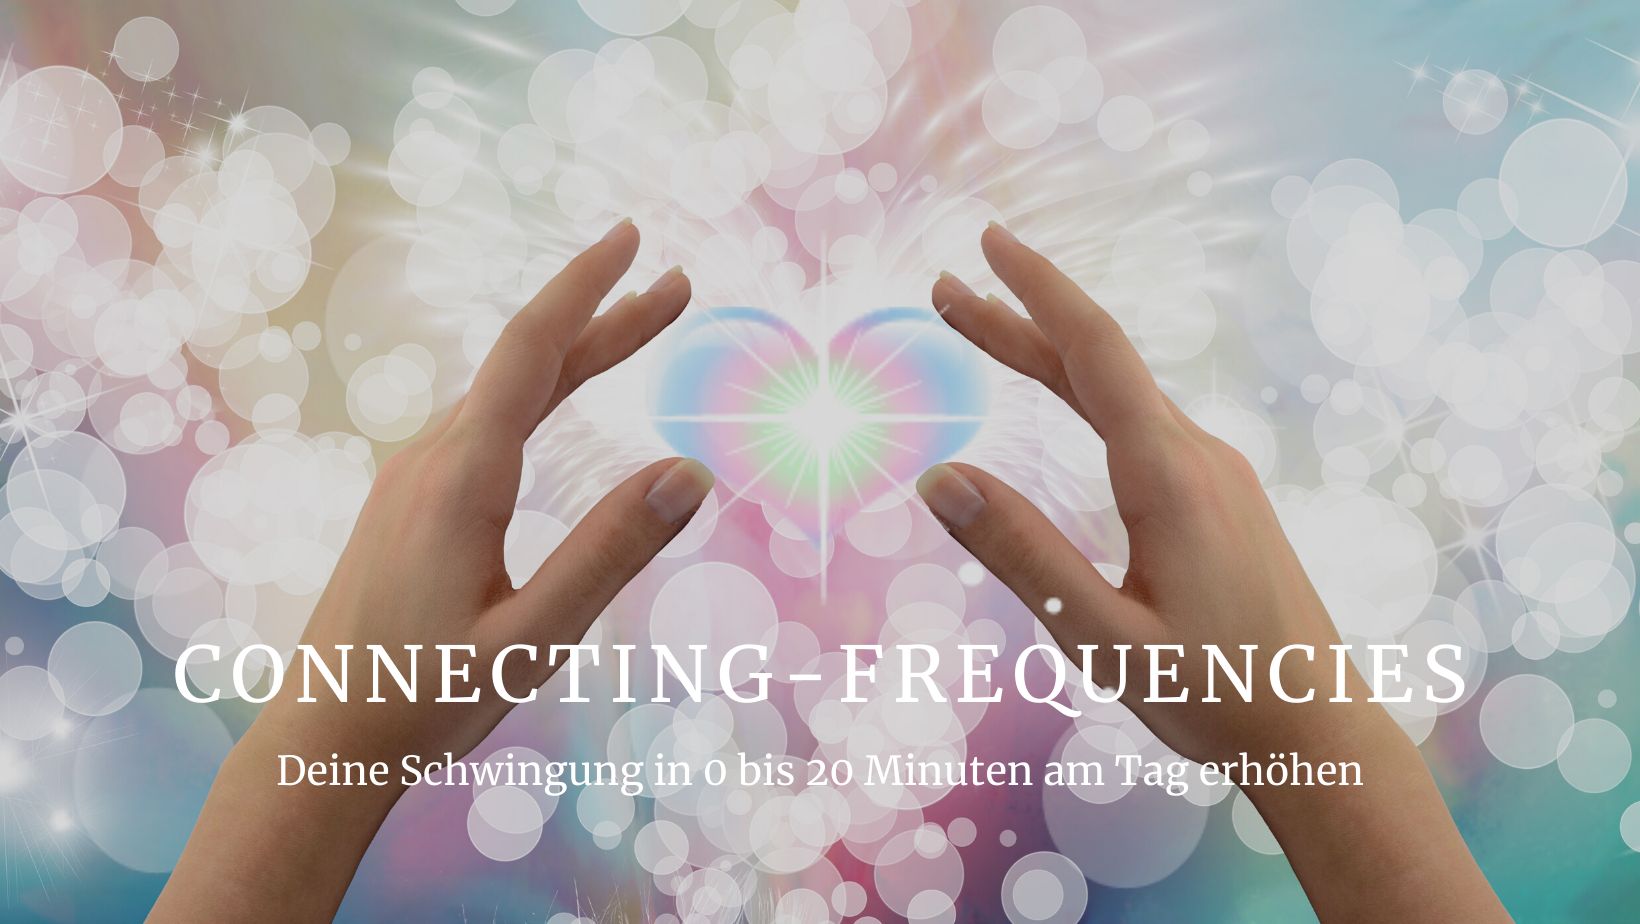 Connecting Frequencies are Key to perfect Health